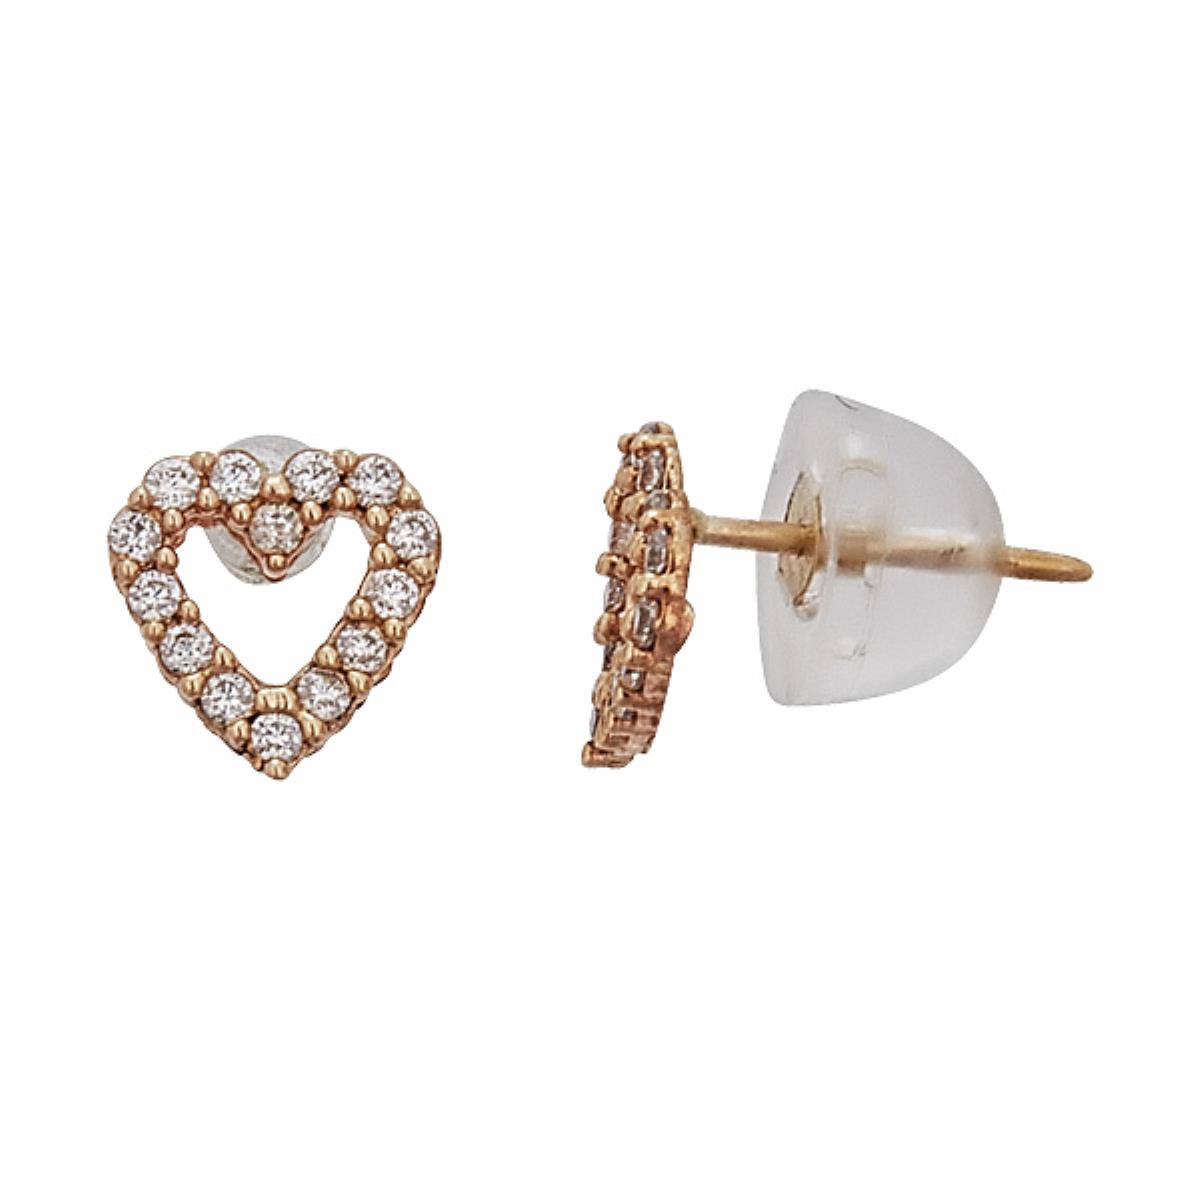 10K Yellow Gold Micropave Open Heart Stud Earrings with Bubble Silicone Backs